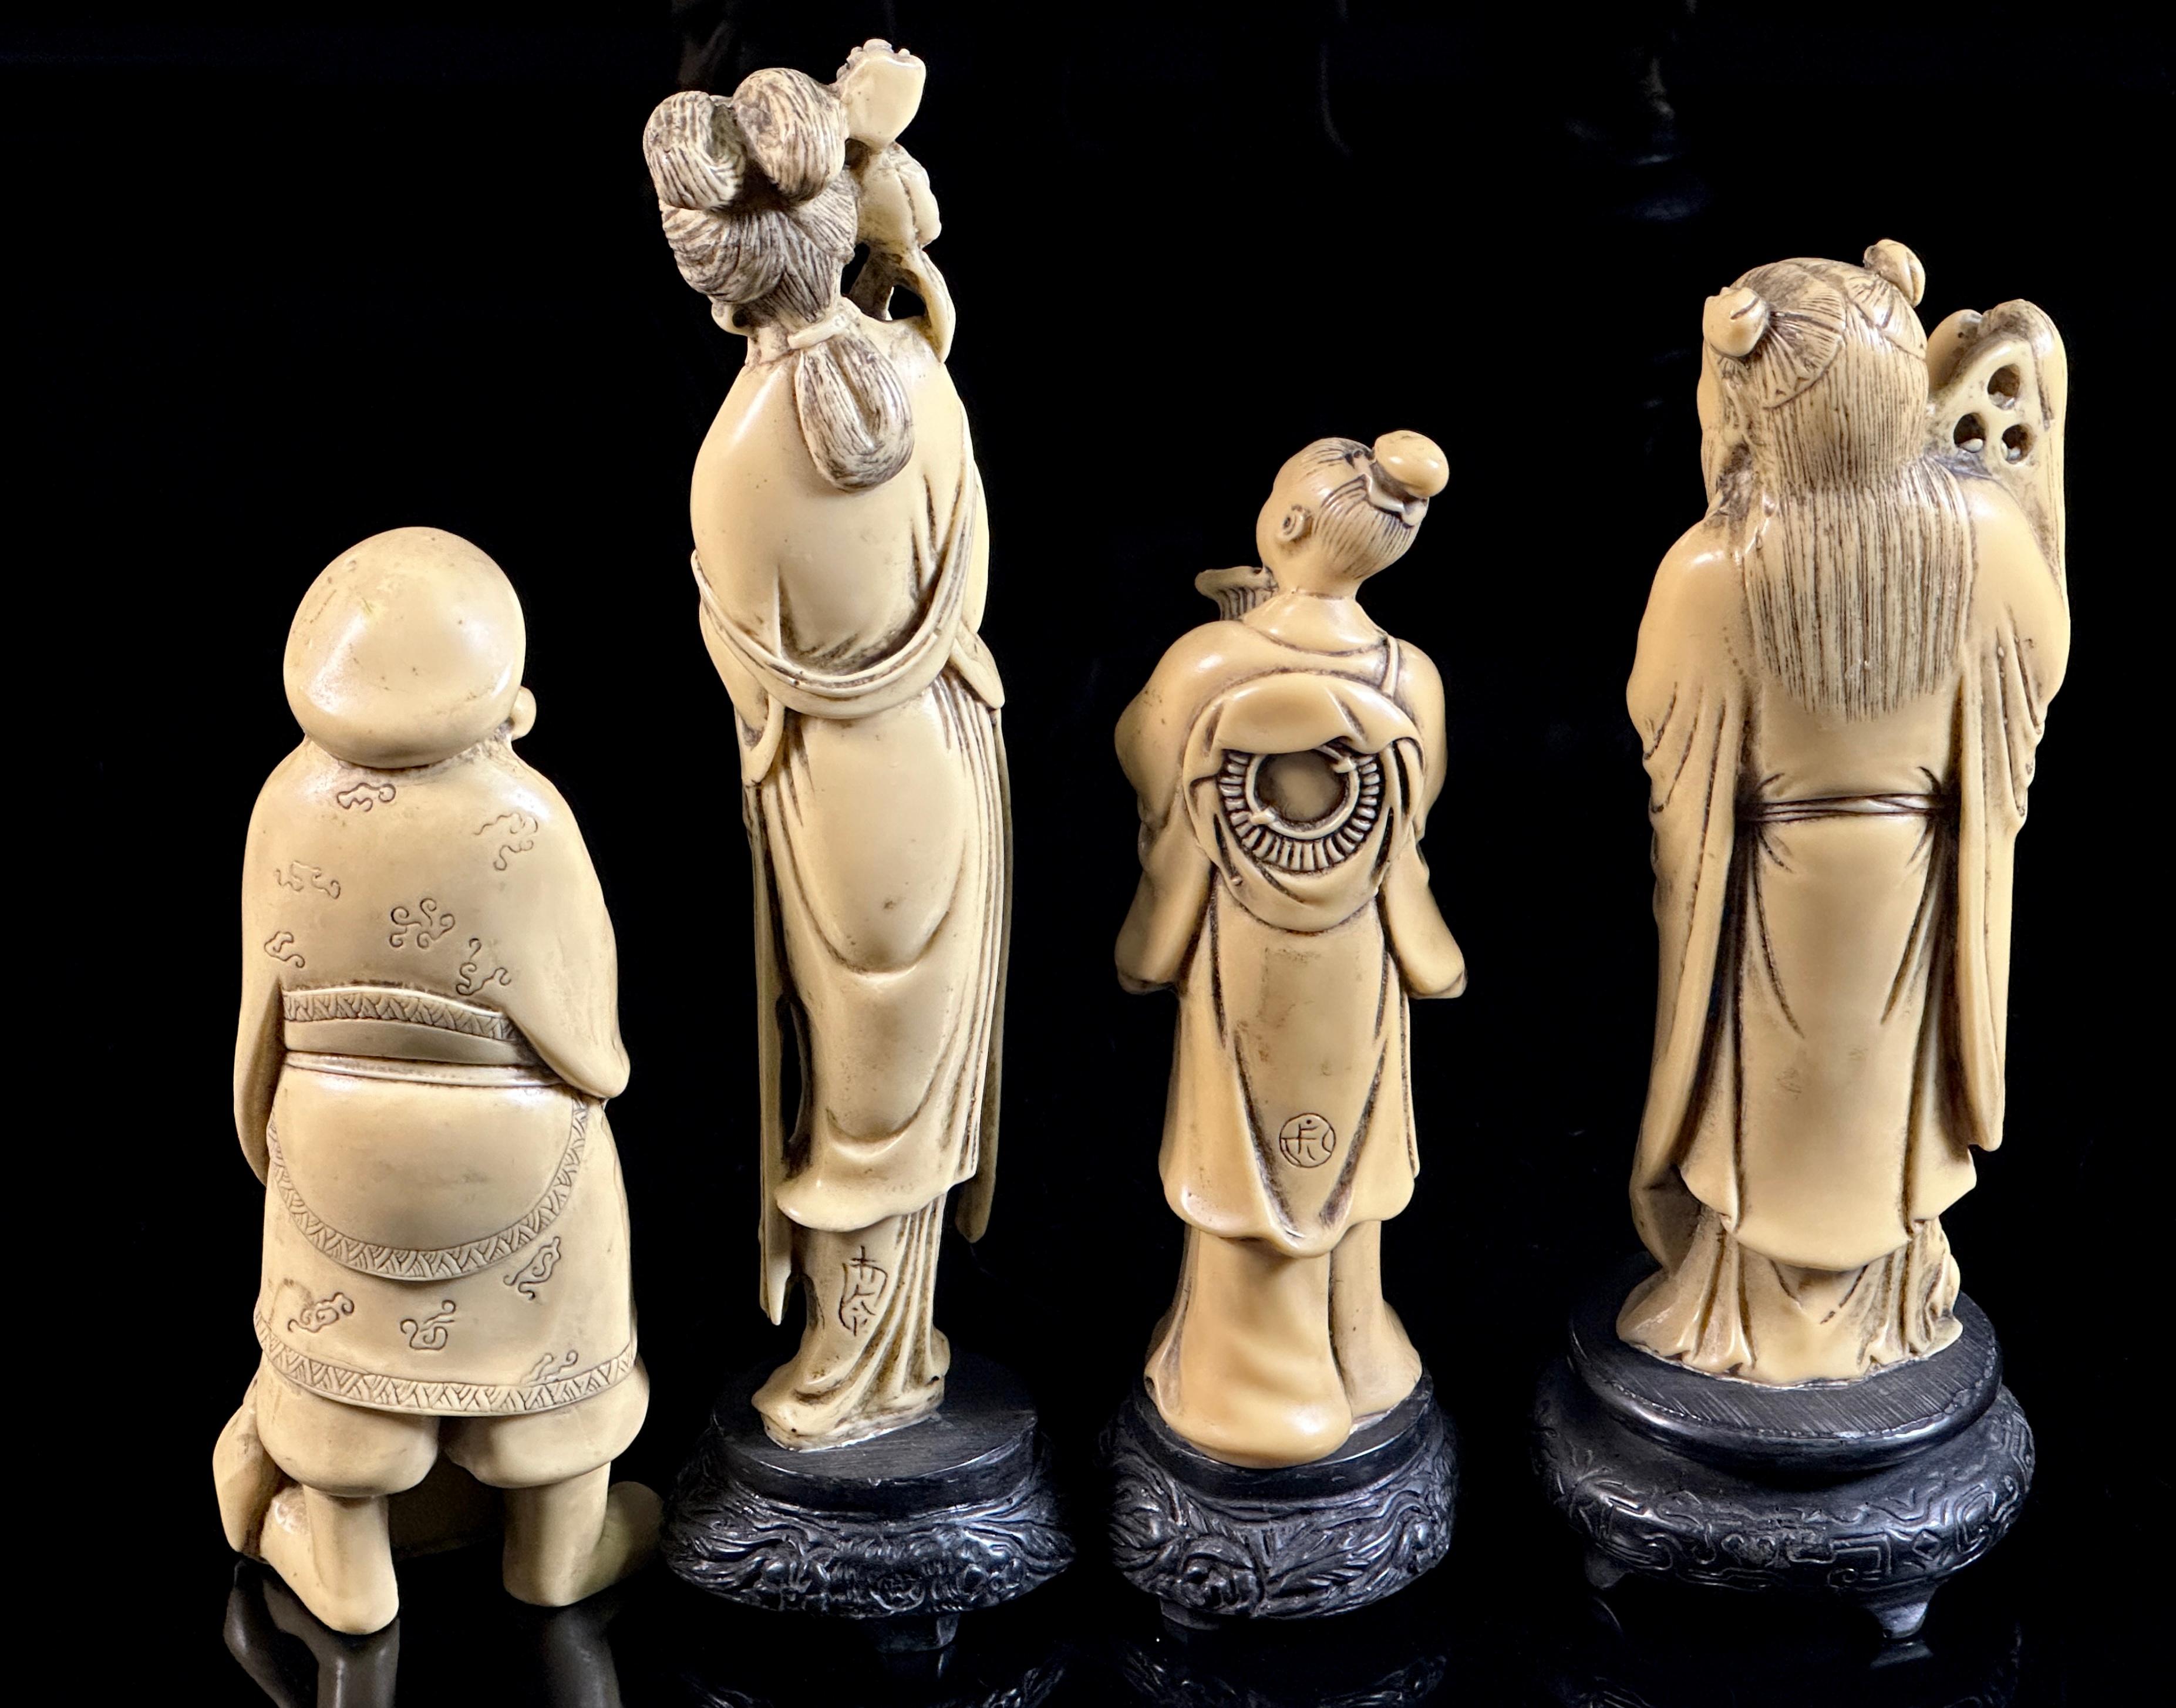 Four Asian Carved Figures